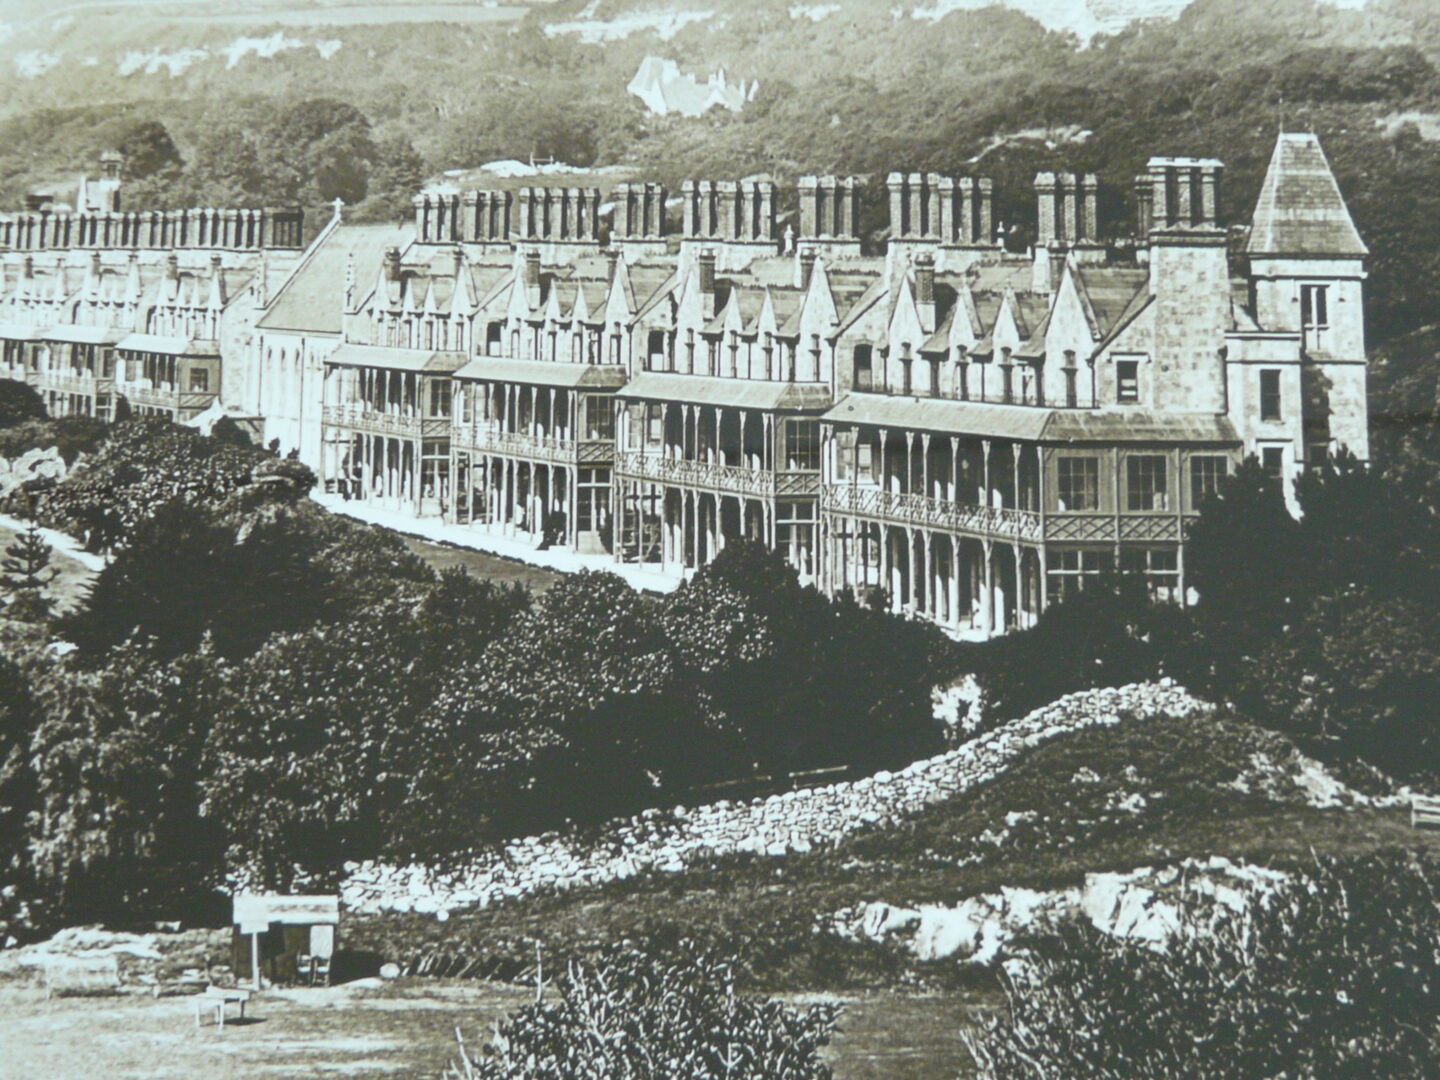 Black and white image showing the long hospital building and the Gardens in front of them.